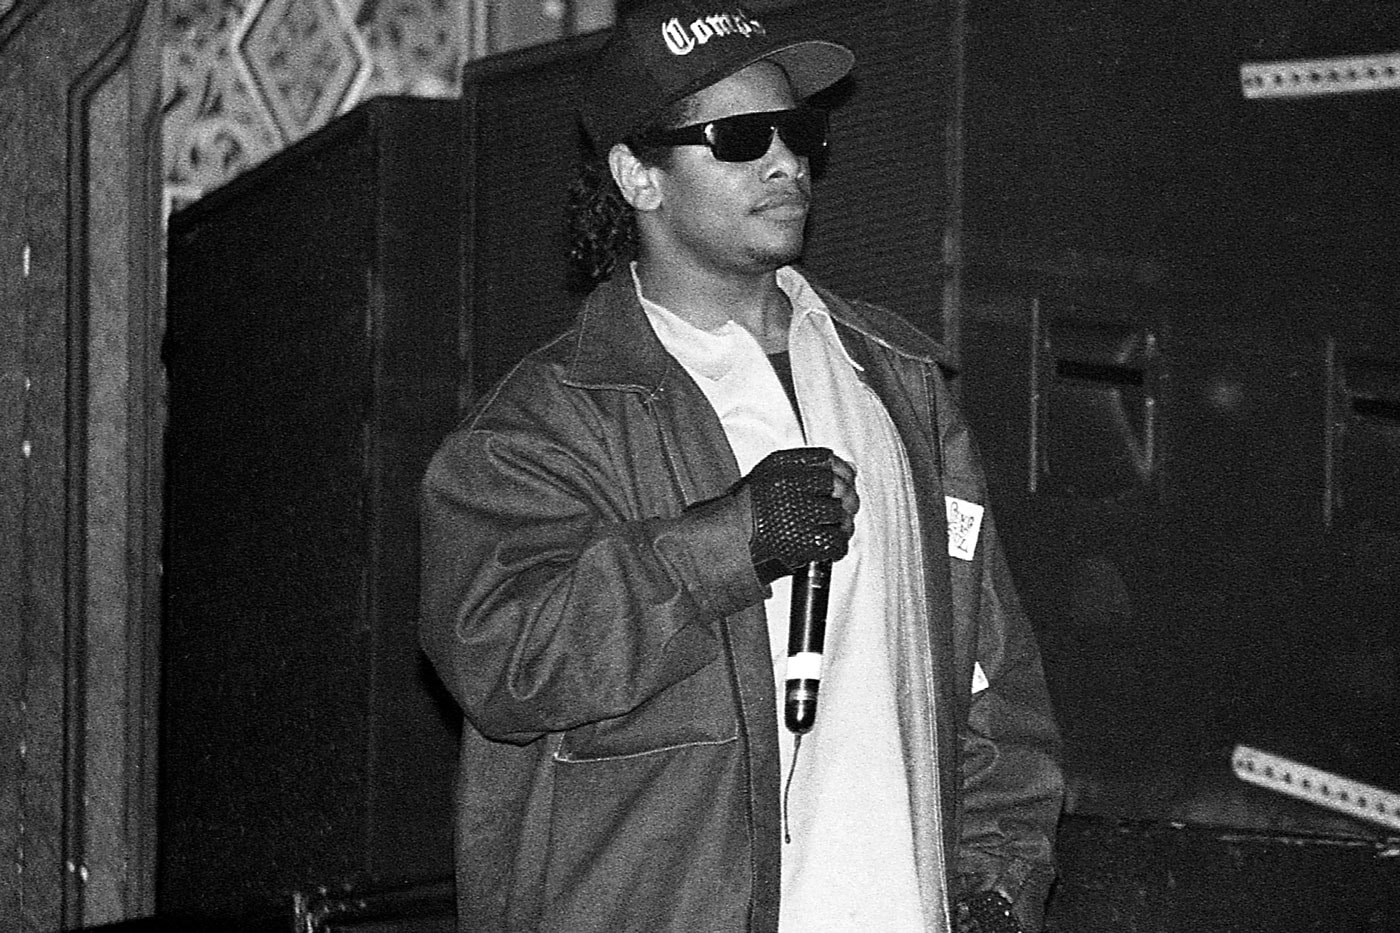 Eazy-E's Son Claims Father's Death Caused by Suge Knight